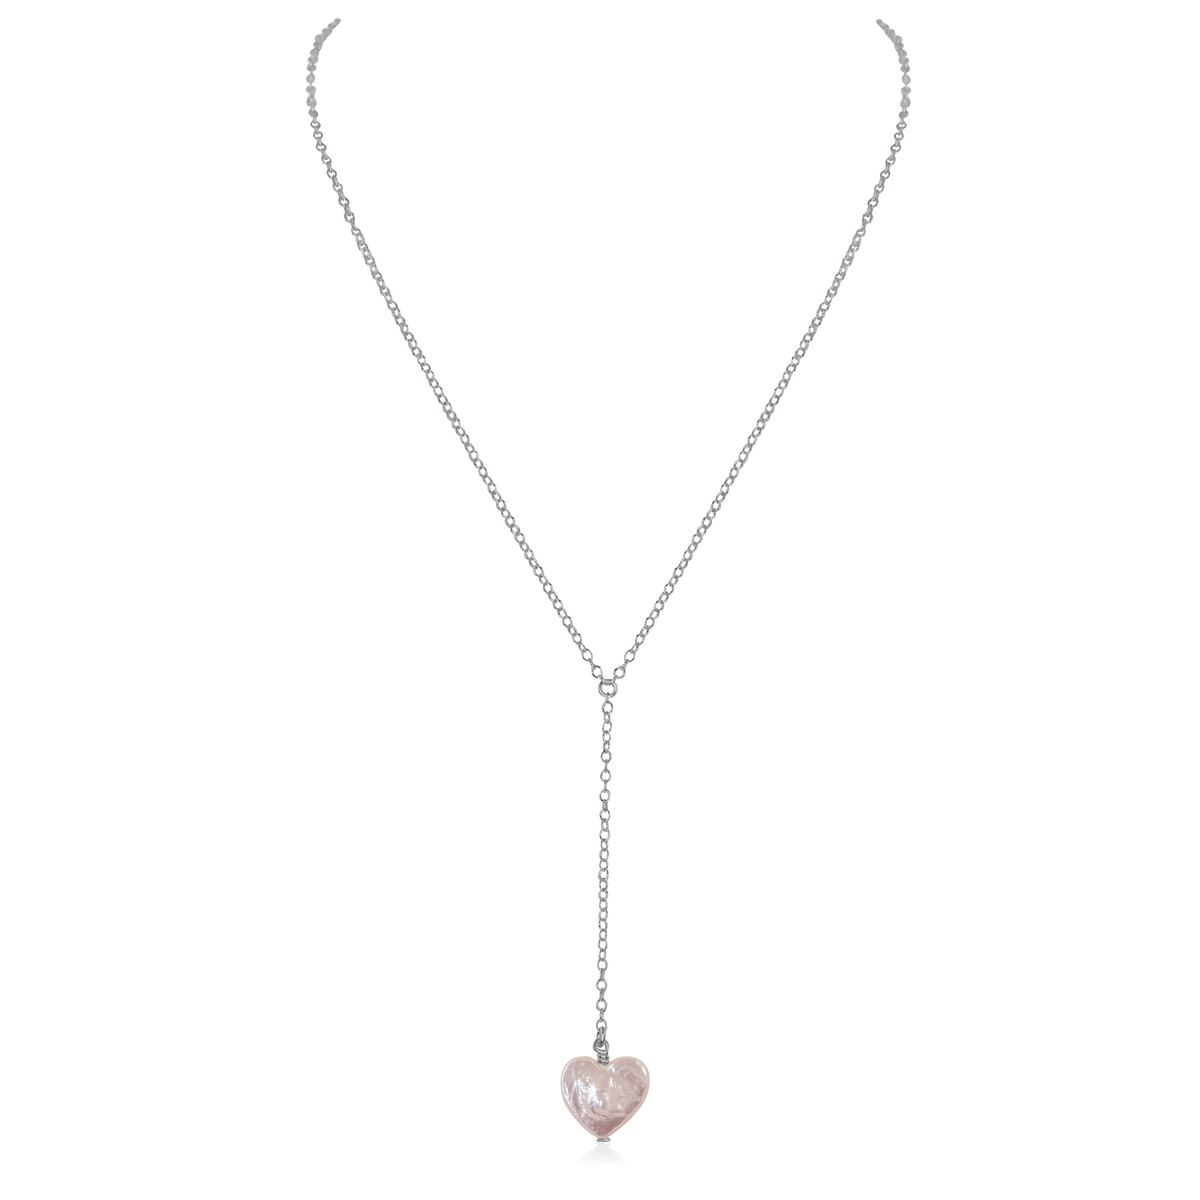 Freshwater Pearl Heart Lariat Necklace - Freshwater Pearl Heart Lariat Necklace - Stainless Steel - Luna Tide Handmade Crystal Jewellery